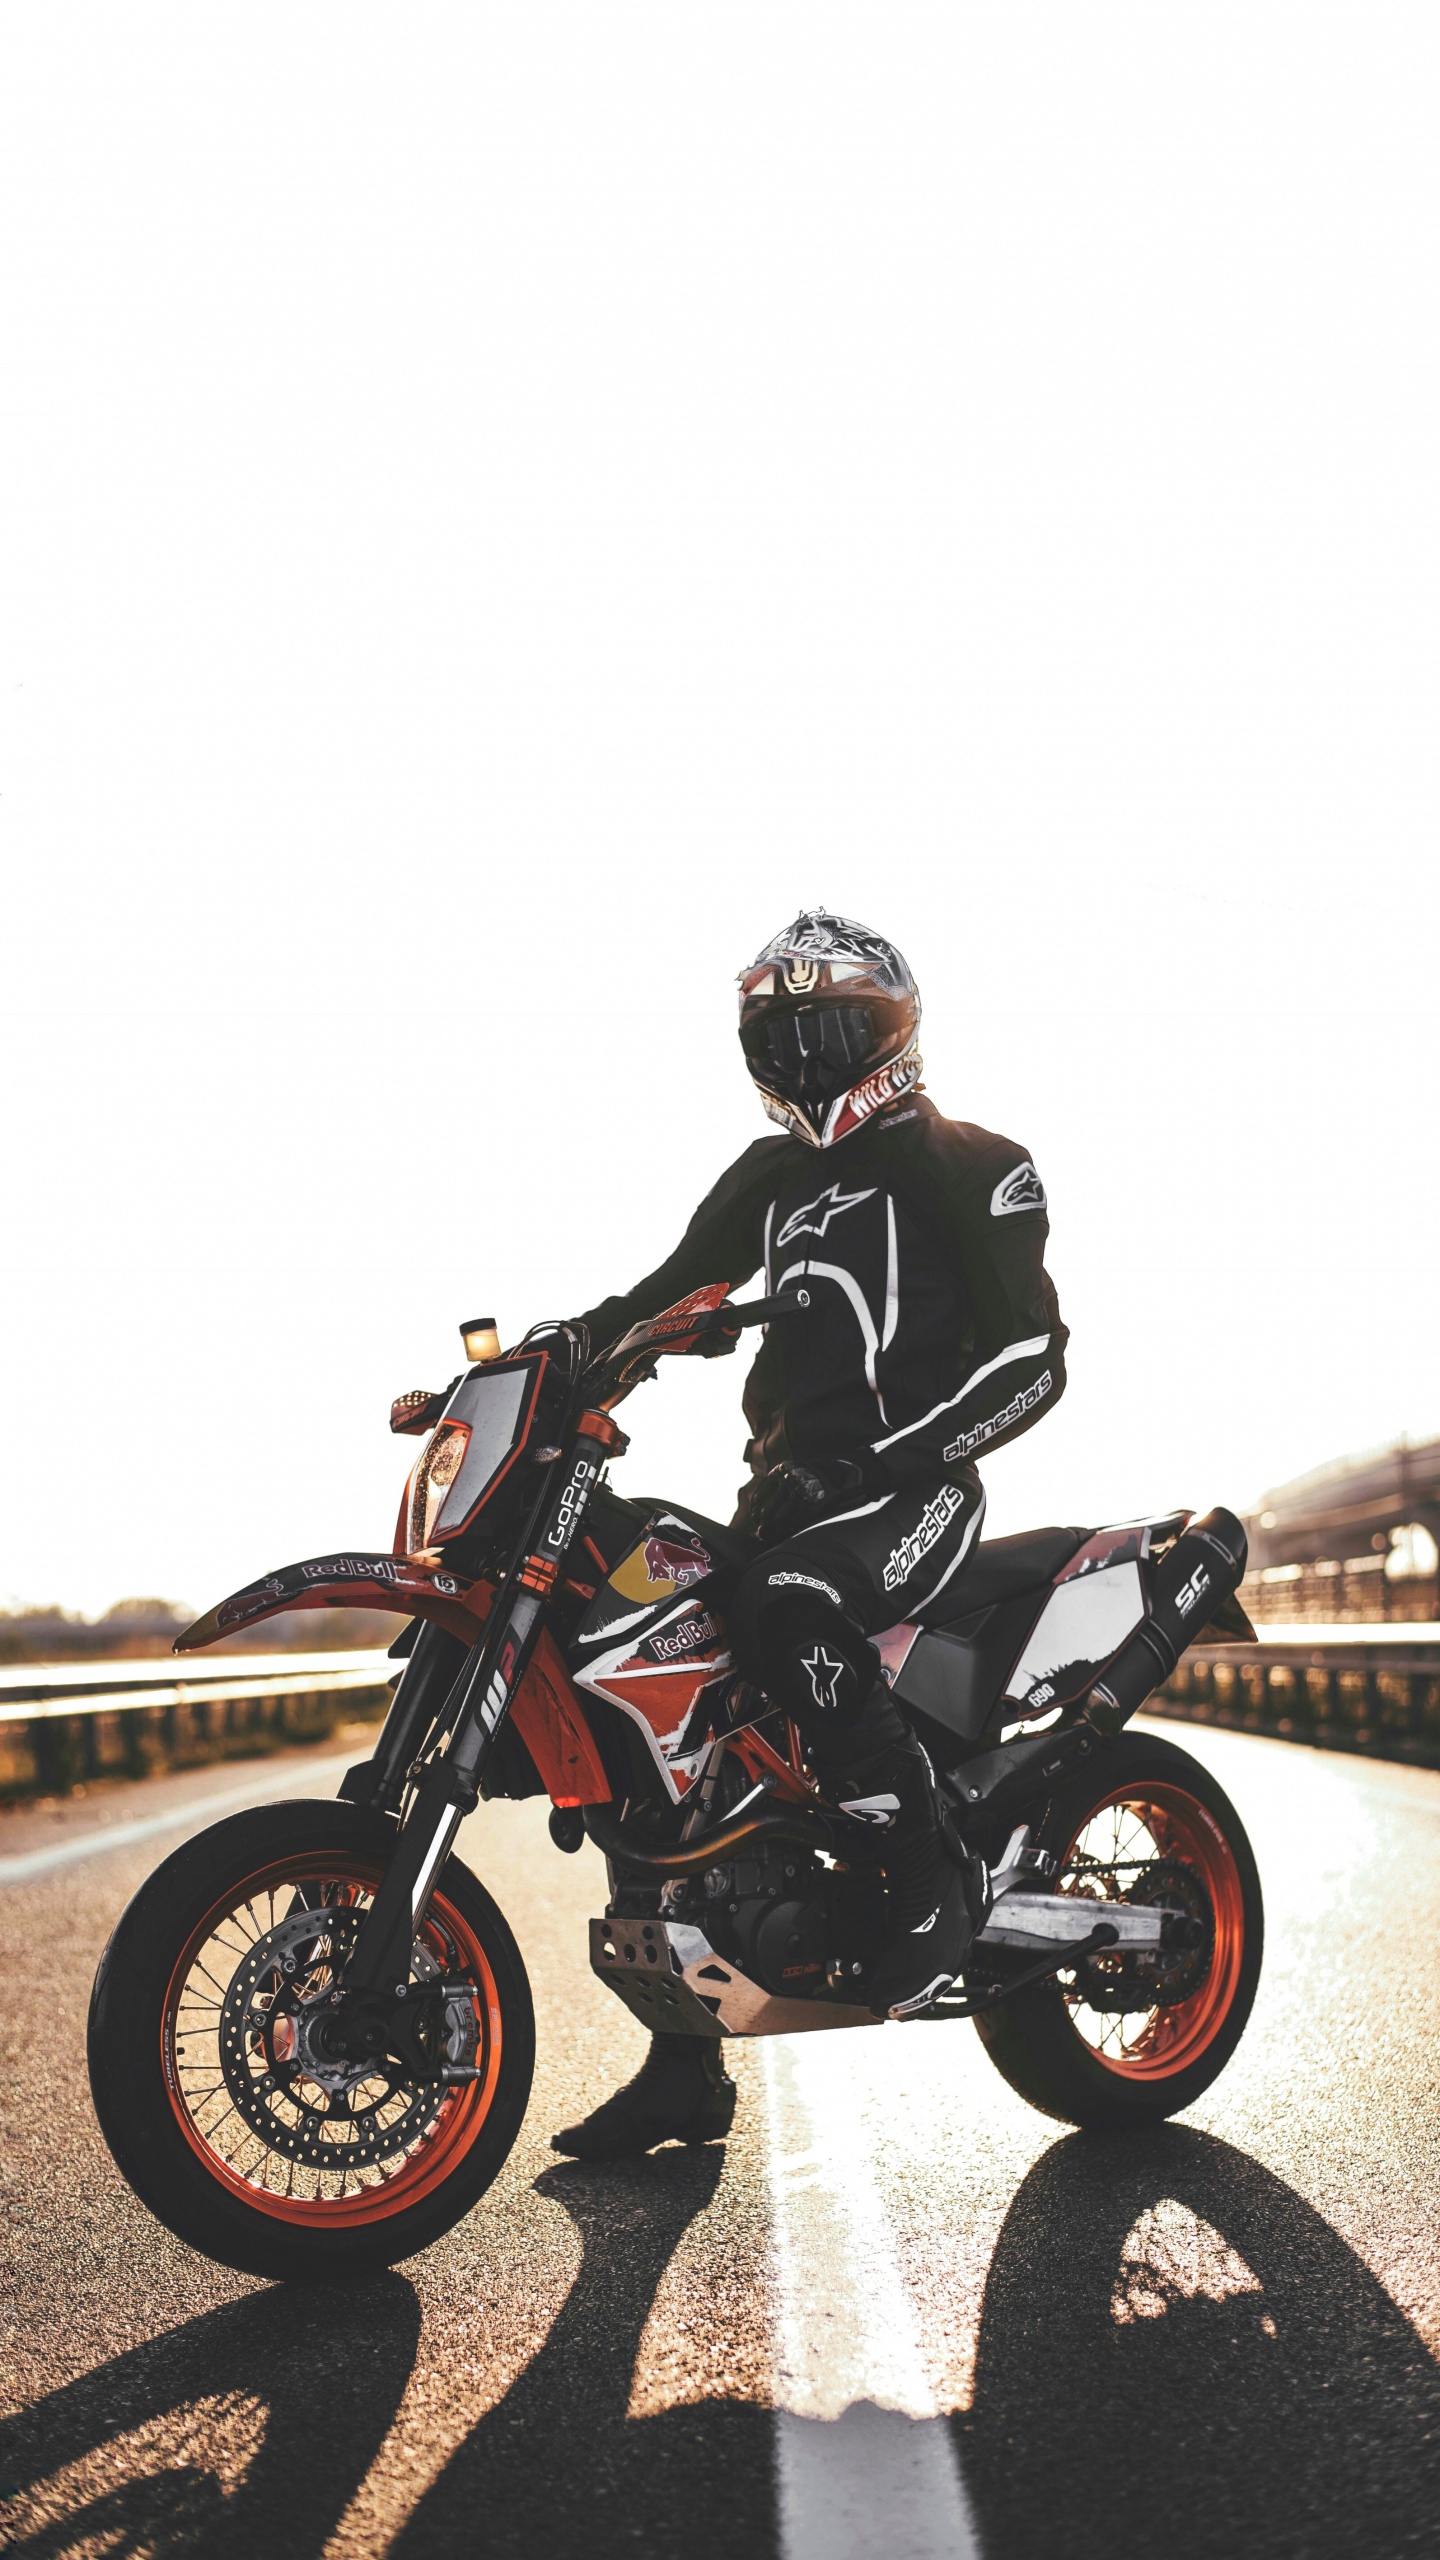 Man in Black Jacket Riding Motorcycle. Wallpaper in 1440x2560 Resolution